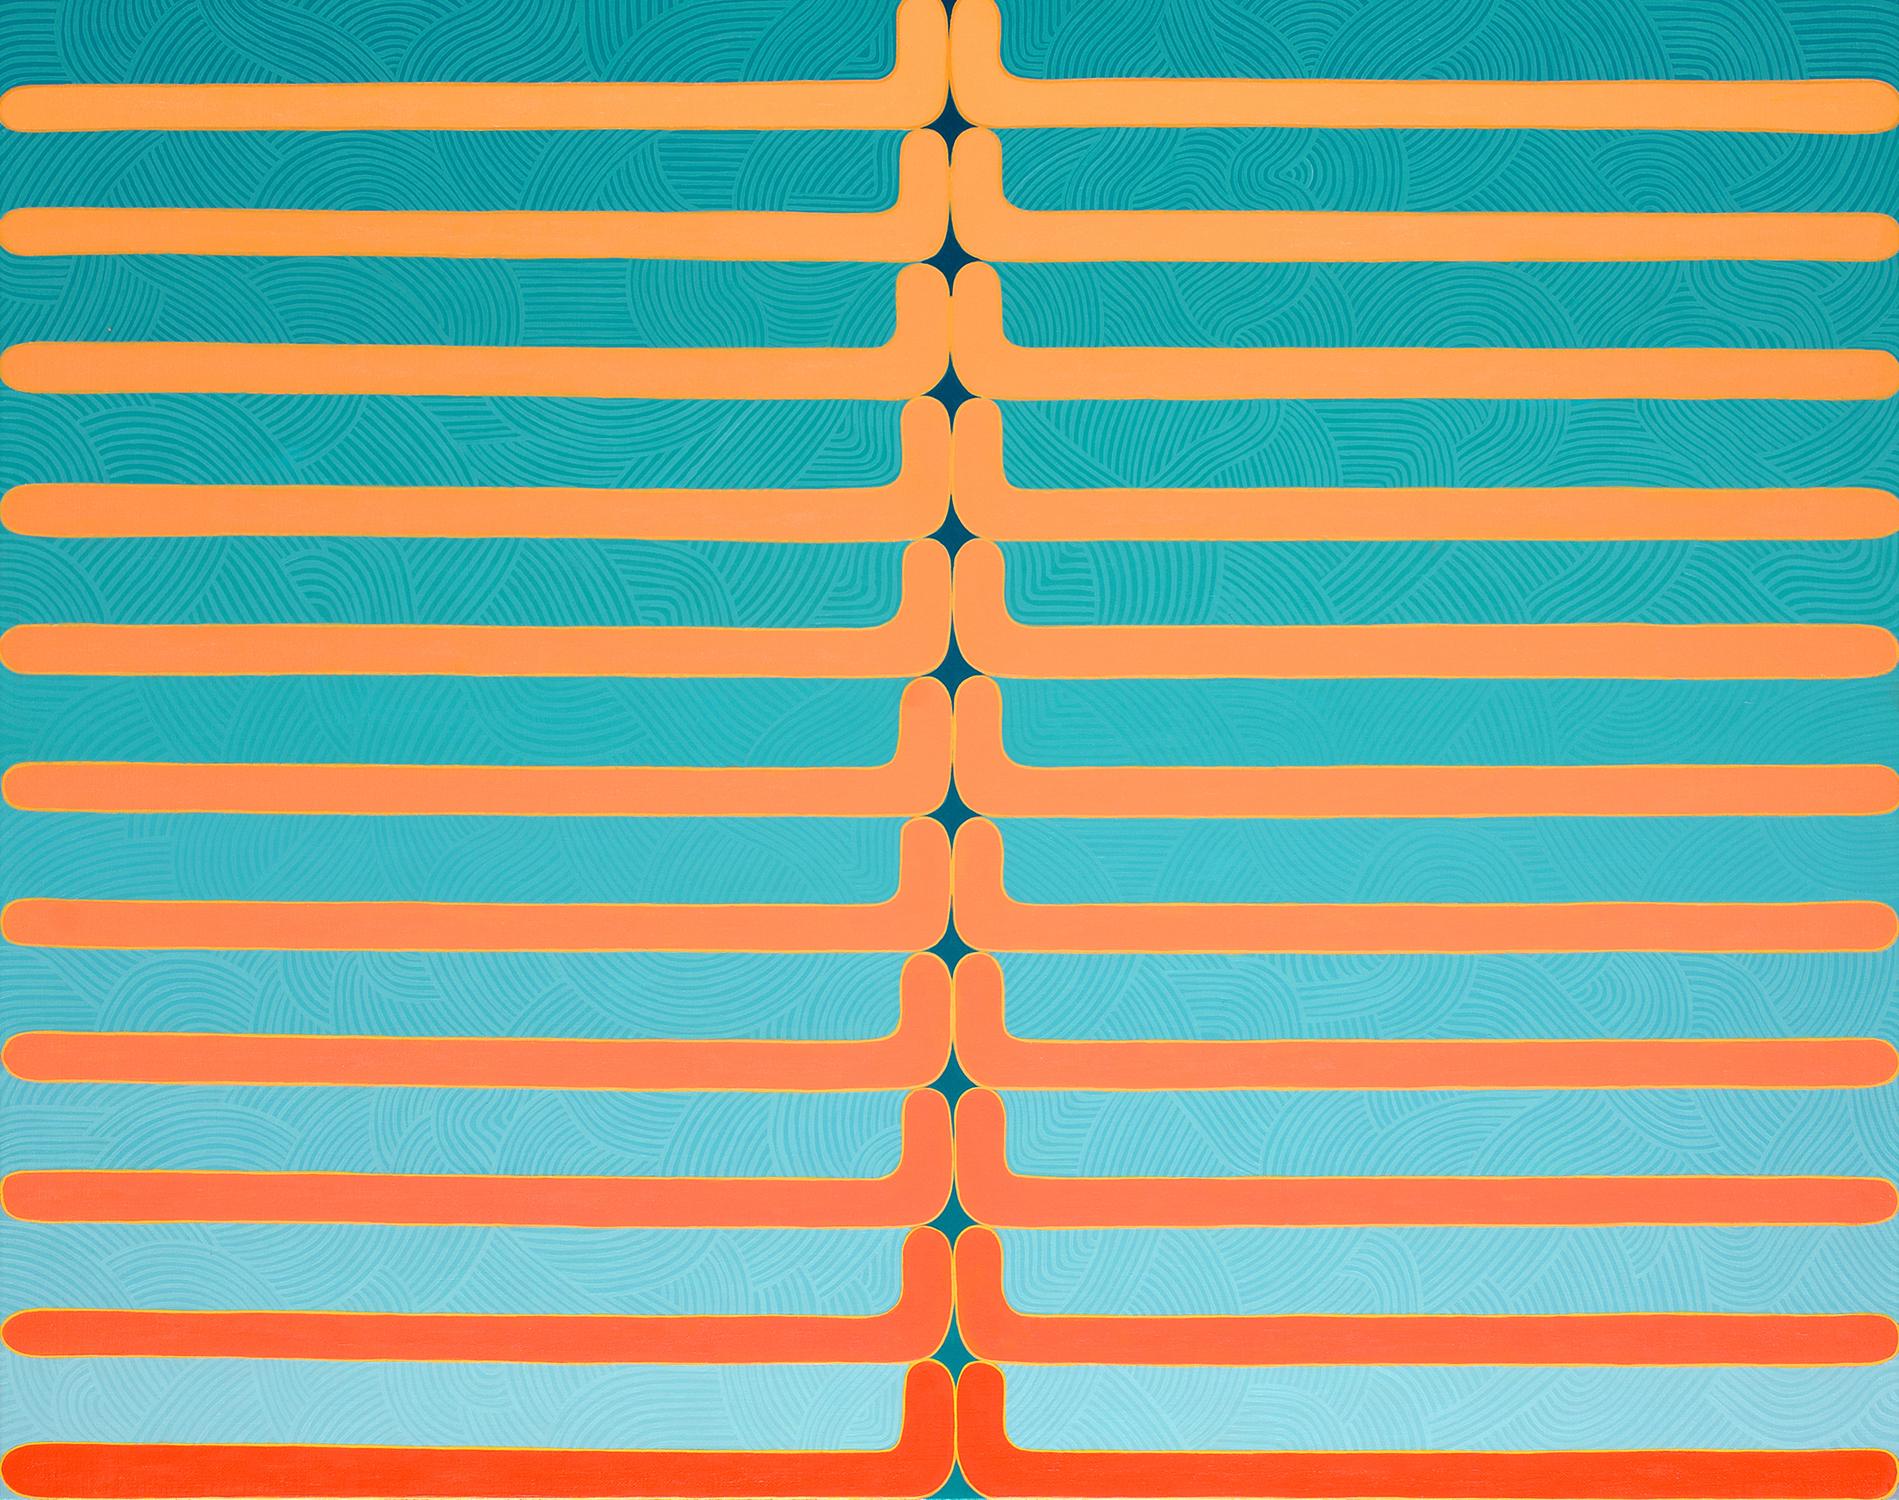 Sun Salutations Abstract Geometric Pattern Painting Blue Teal Orange Coral Peach